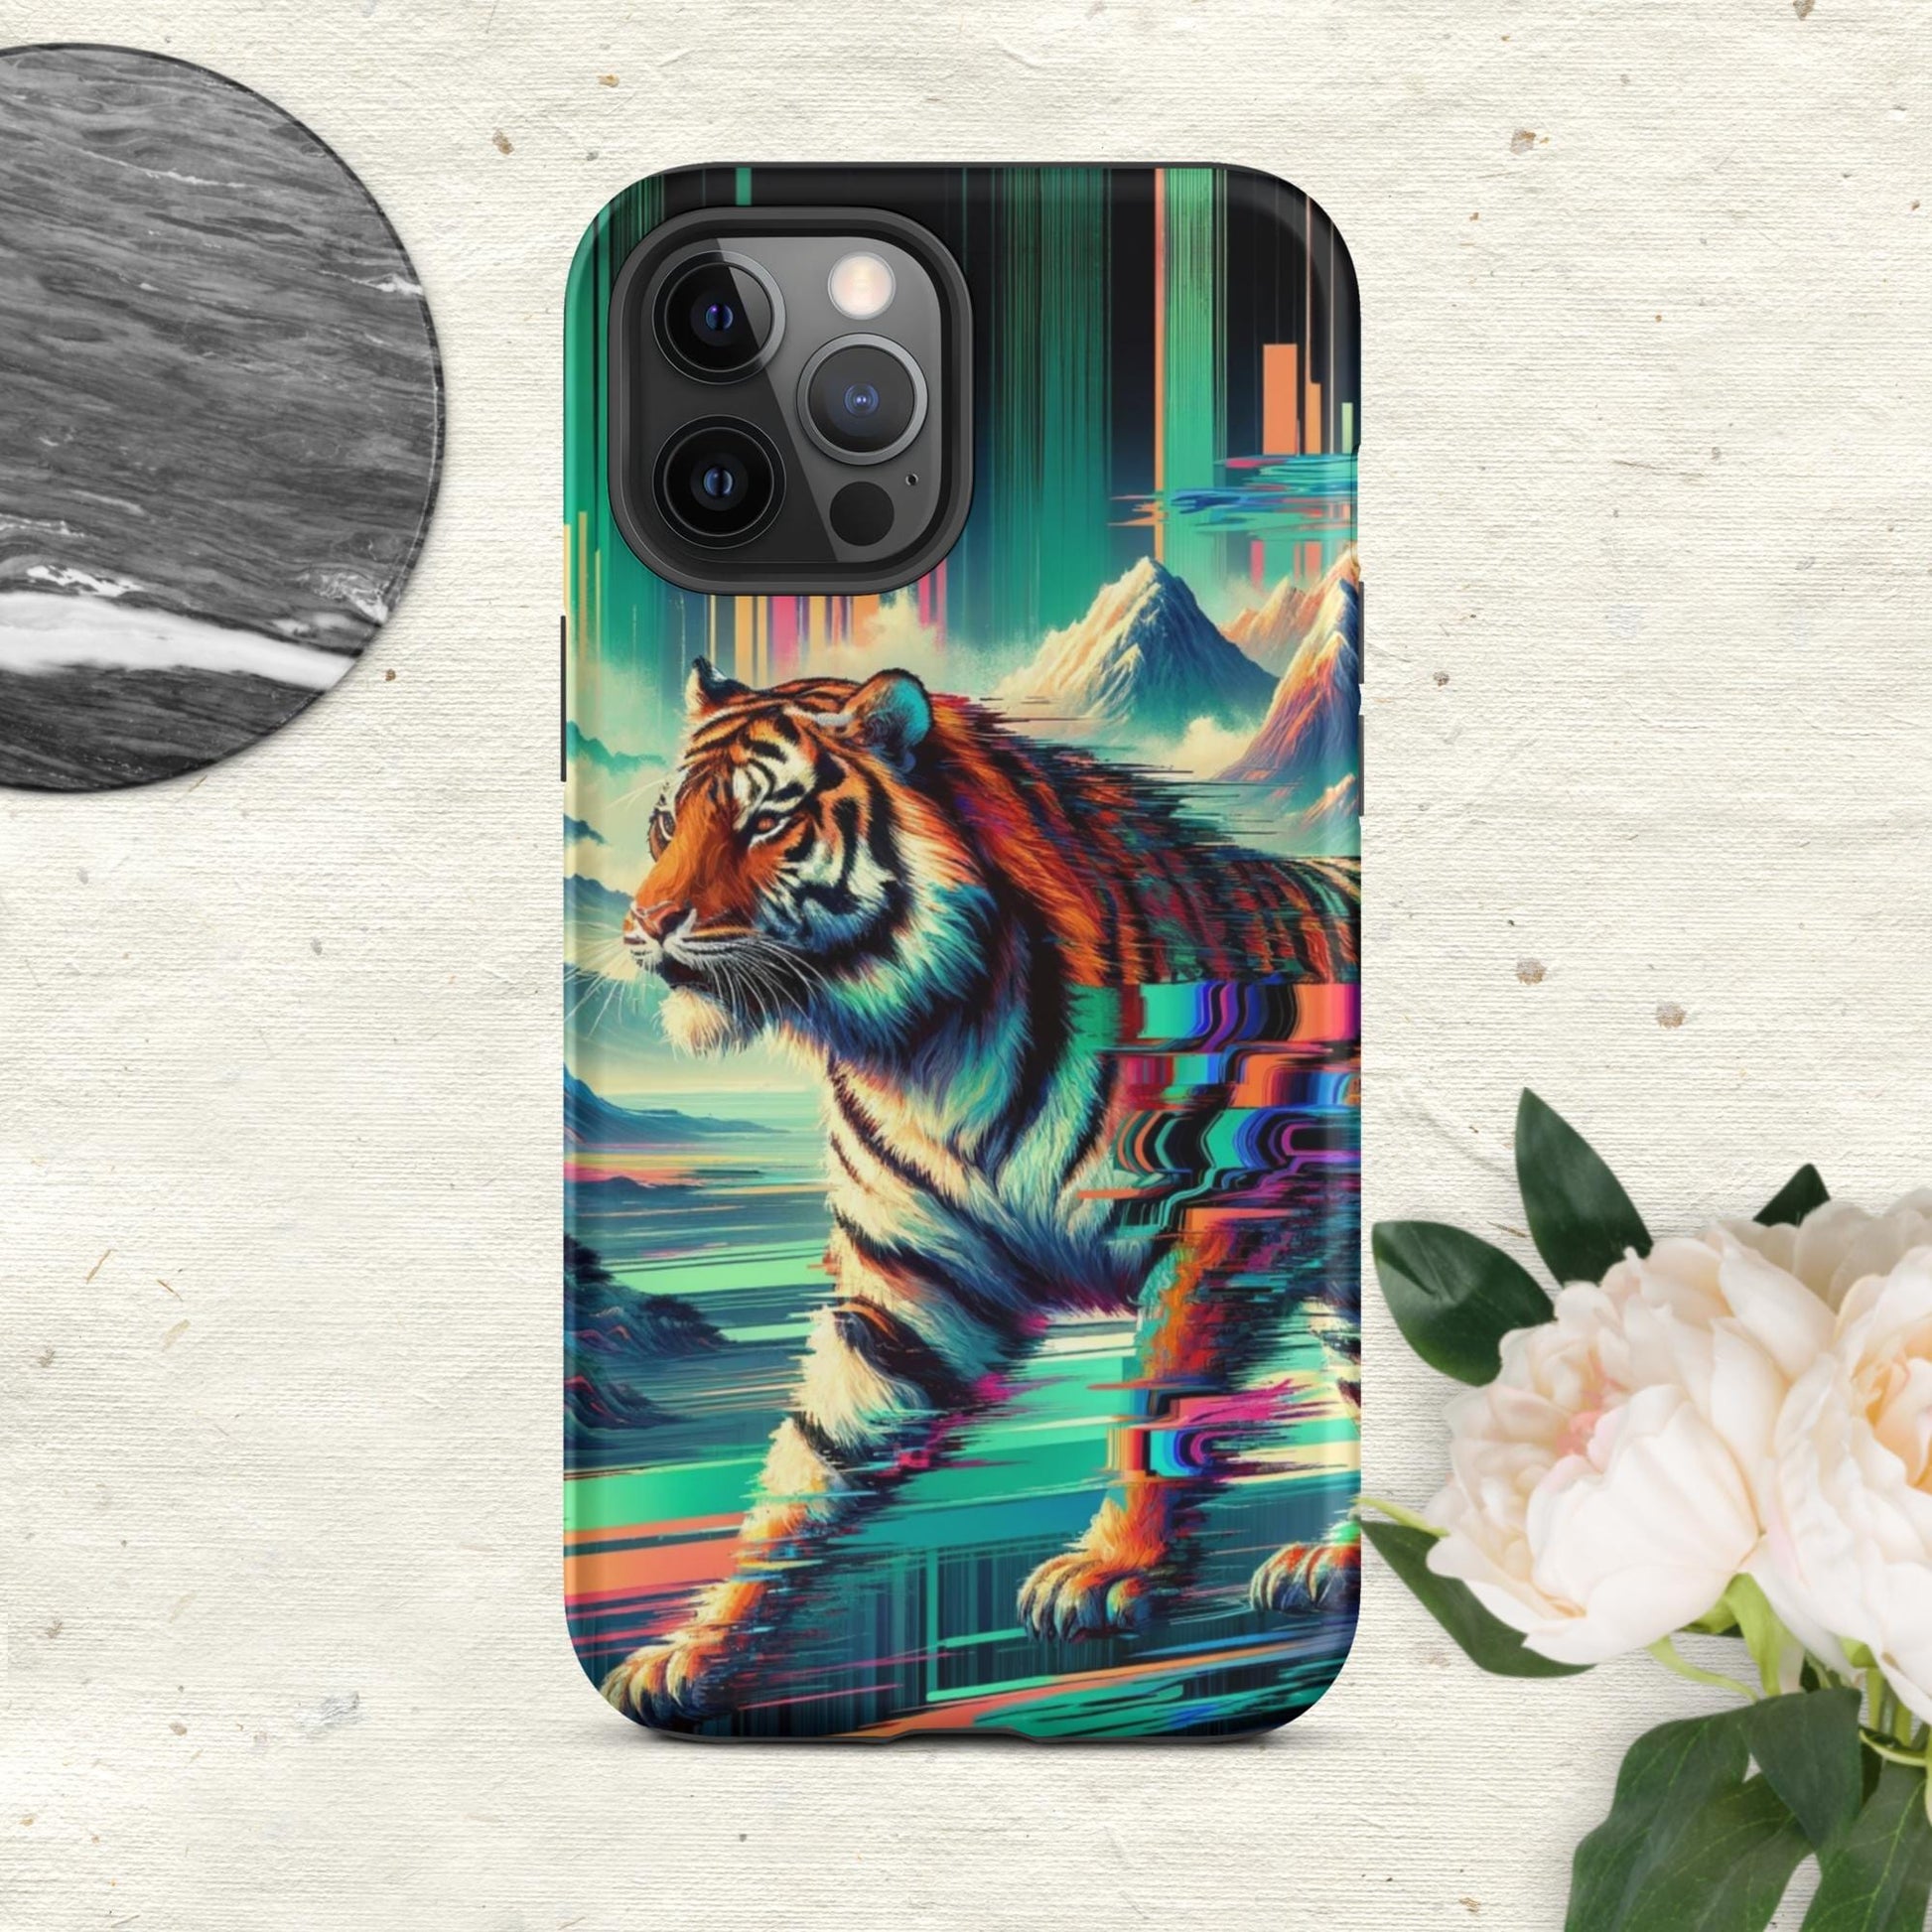 The Hologram Hook Up Matte / iPhone 12 Pro Max Tiger Glitch Tough Case for iPhone®